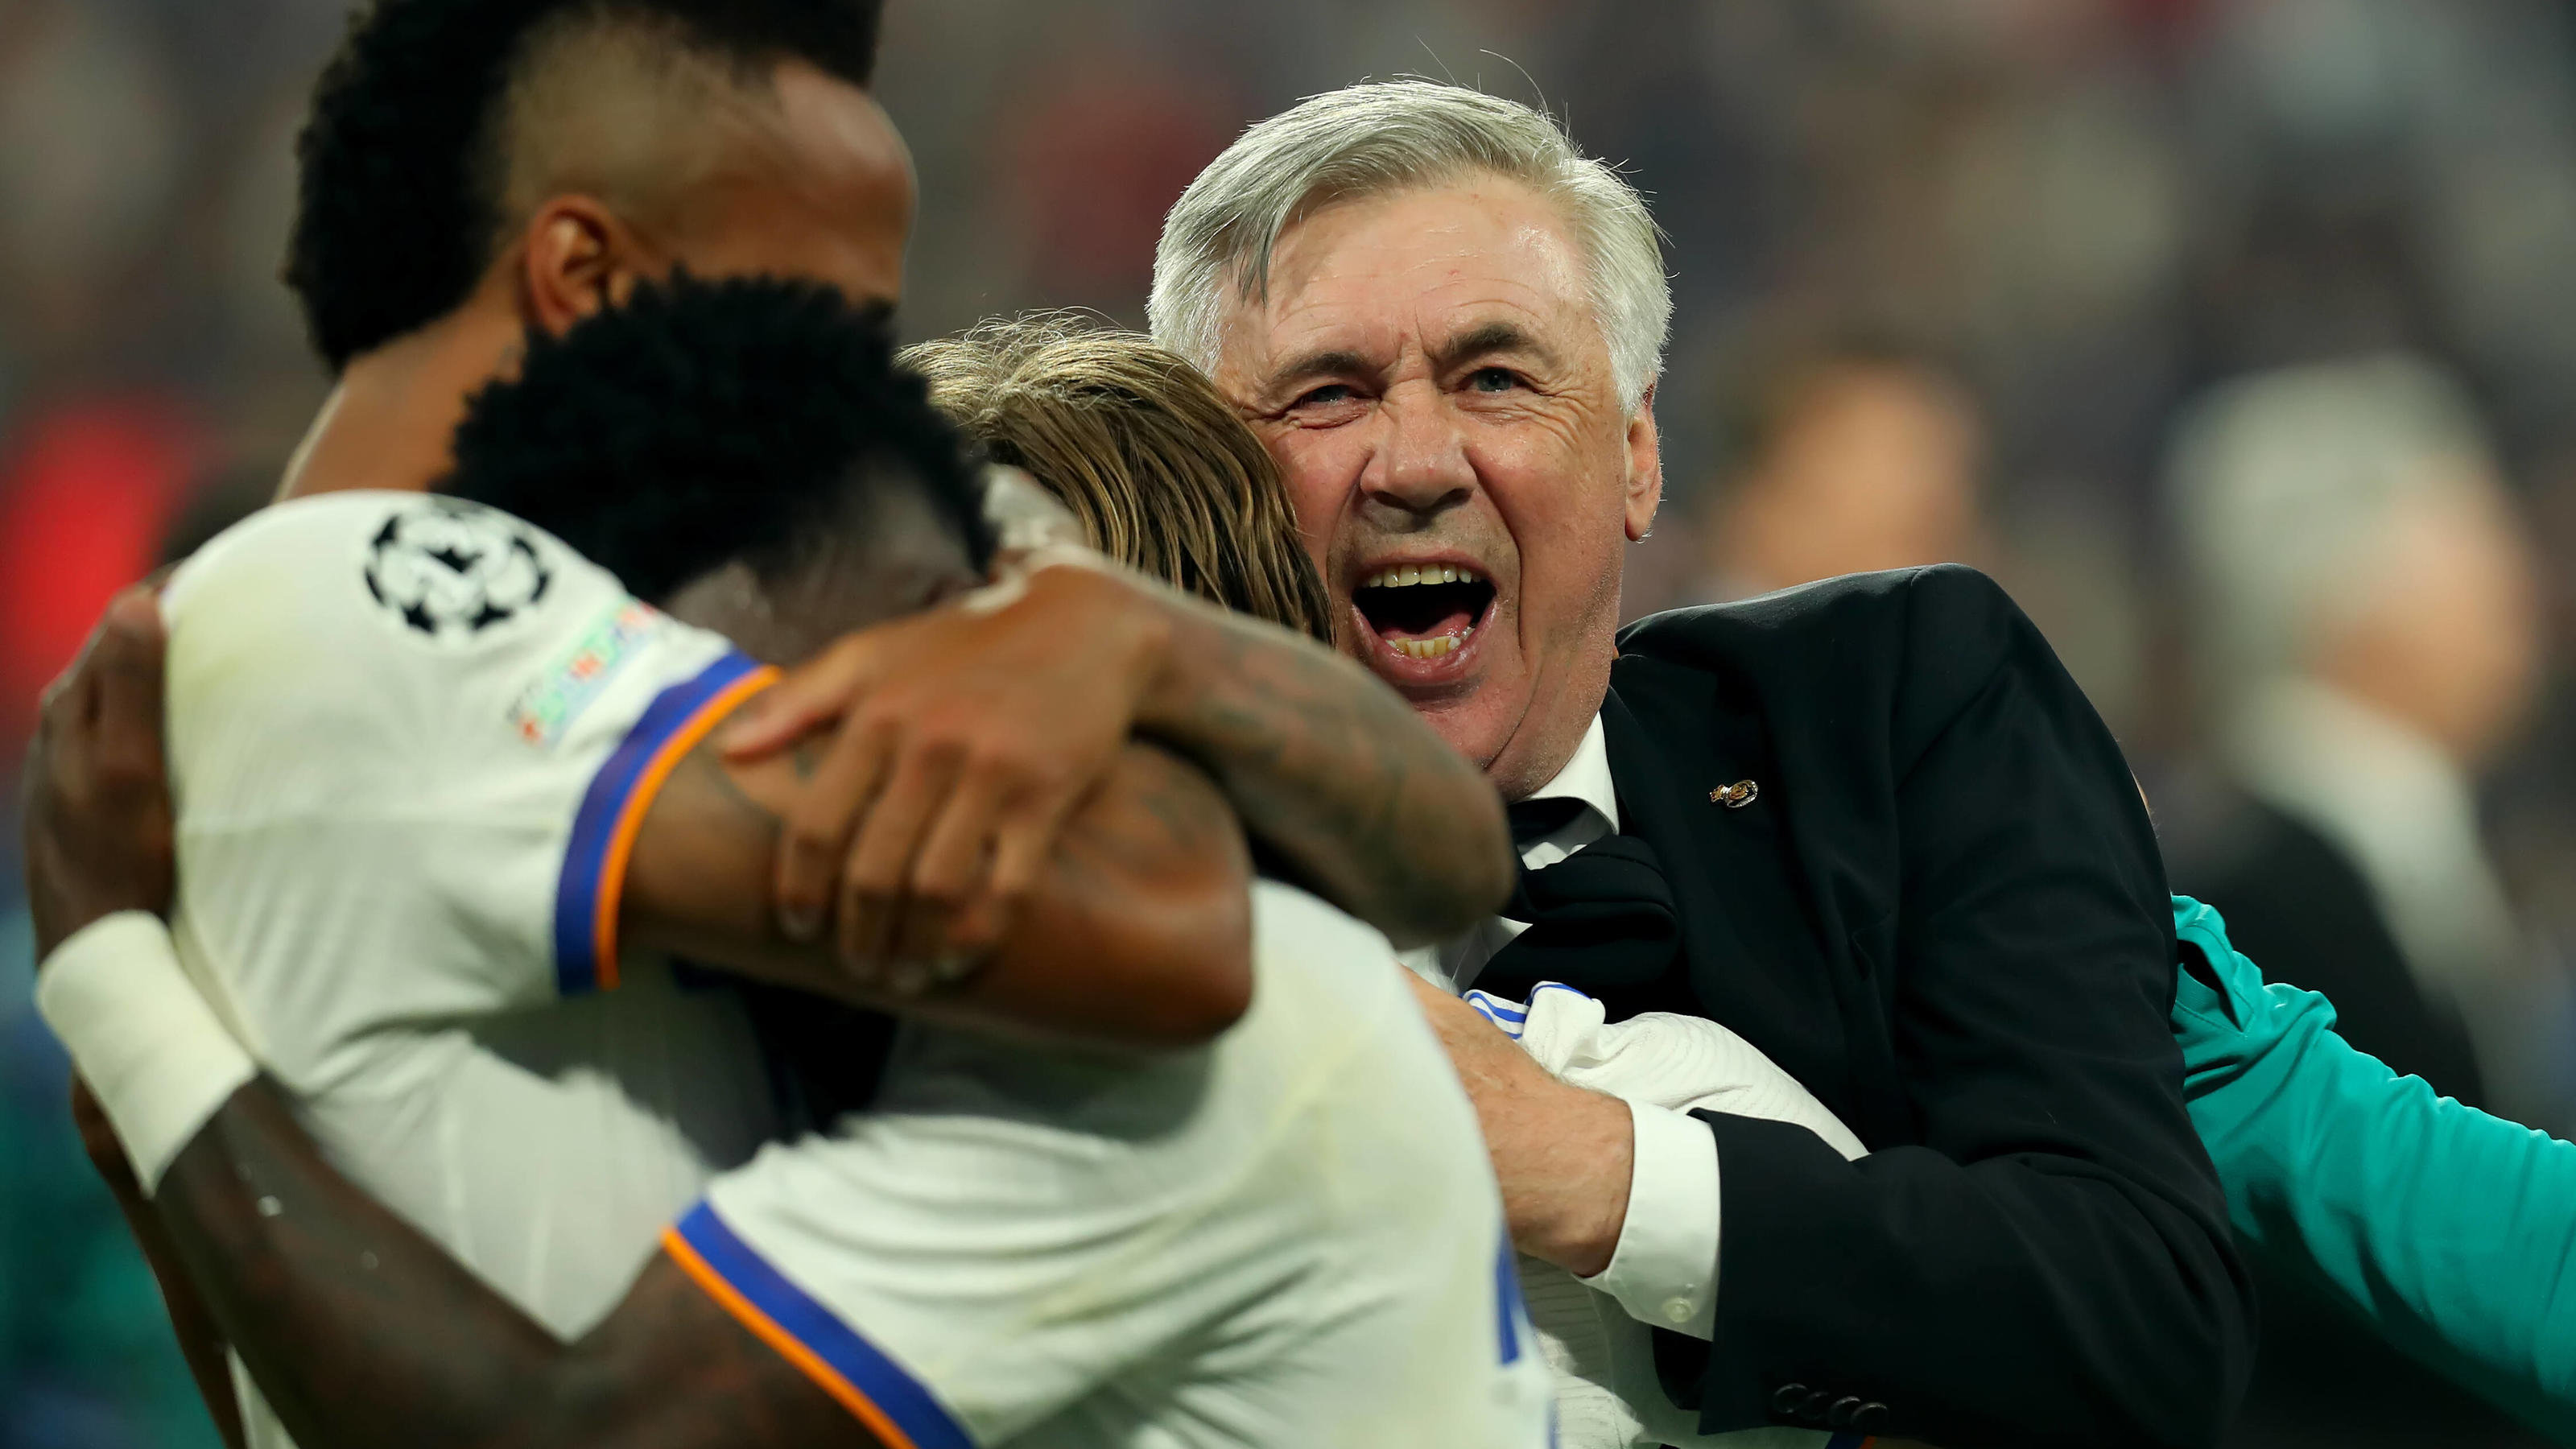  28th May 2022 Stade de France stadium, Saint-Denis, Paris, France. Champions League football final between Liverpool FC and Real Madrid Real Madrid Manager Carlo Ancelotti celebrates after they win the Champions League final PUBLICATIONxNOTxINxUK Ac